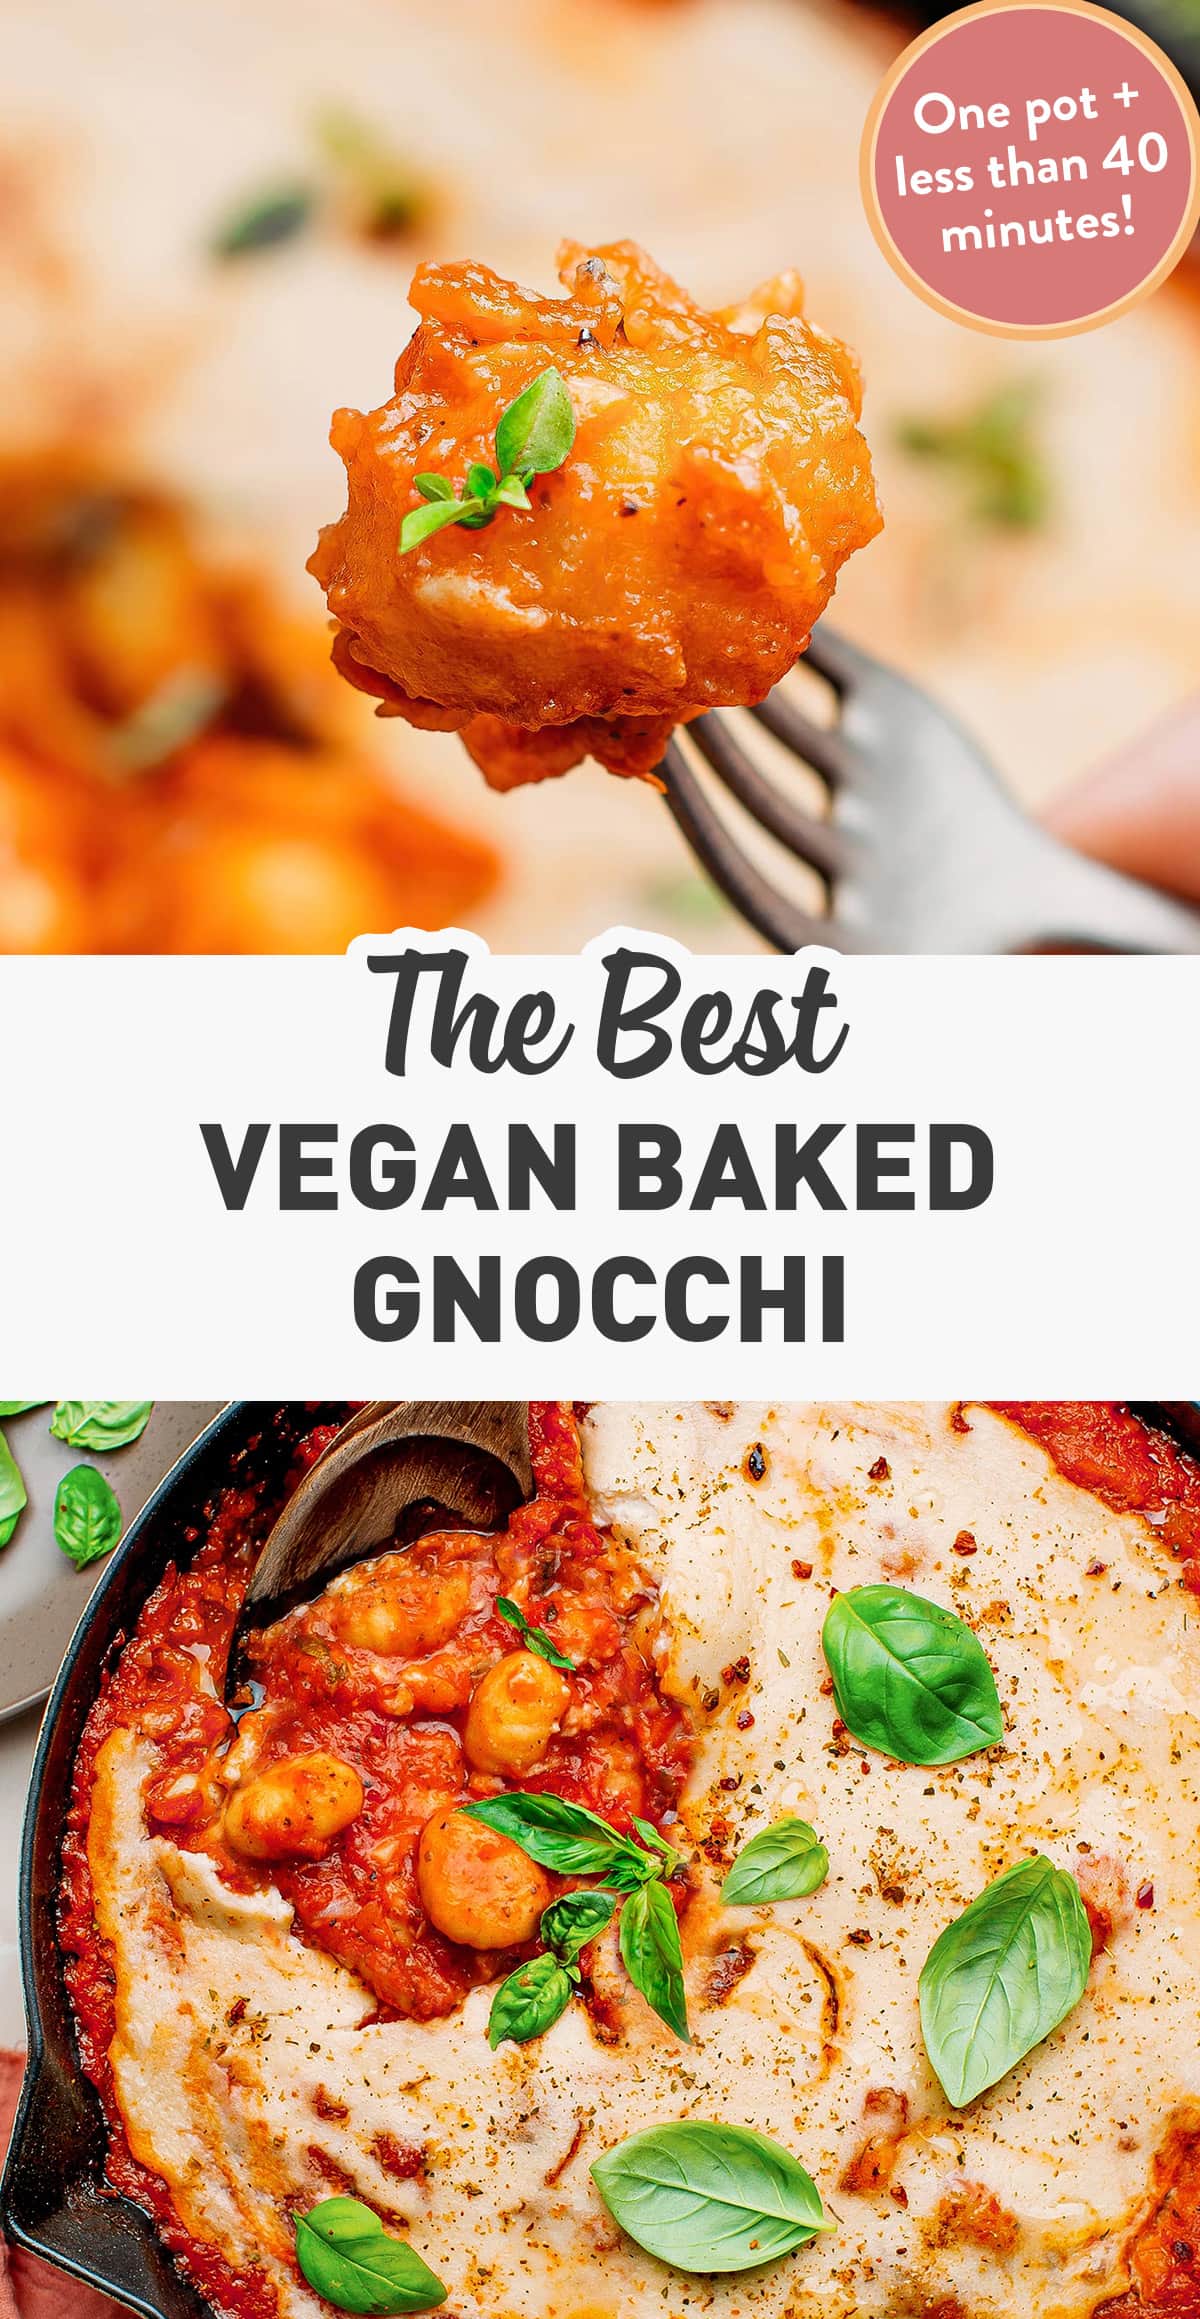 This vegan baked gnocchi is the ultimate family meal! Made in one pot in less than 40 minutes, it comes with tender gnocchi, a rich and garlicky tomato sauce, and a homemade cheese topping! Satisfying, hearty, and easy to make! #gnocchi #vegan #bake